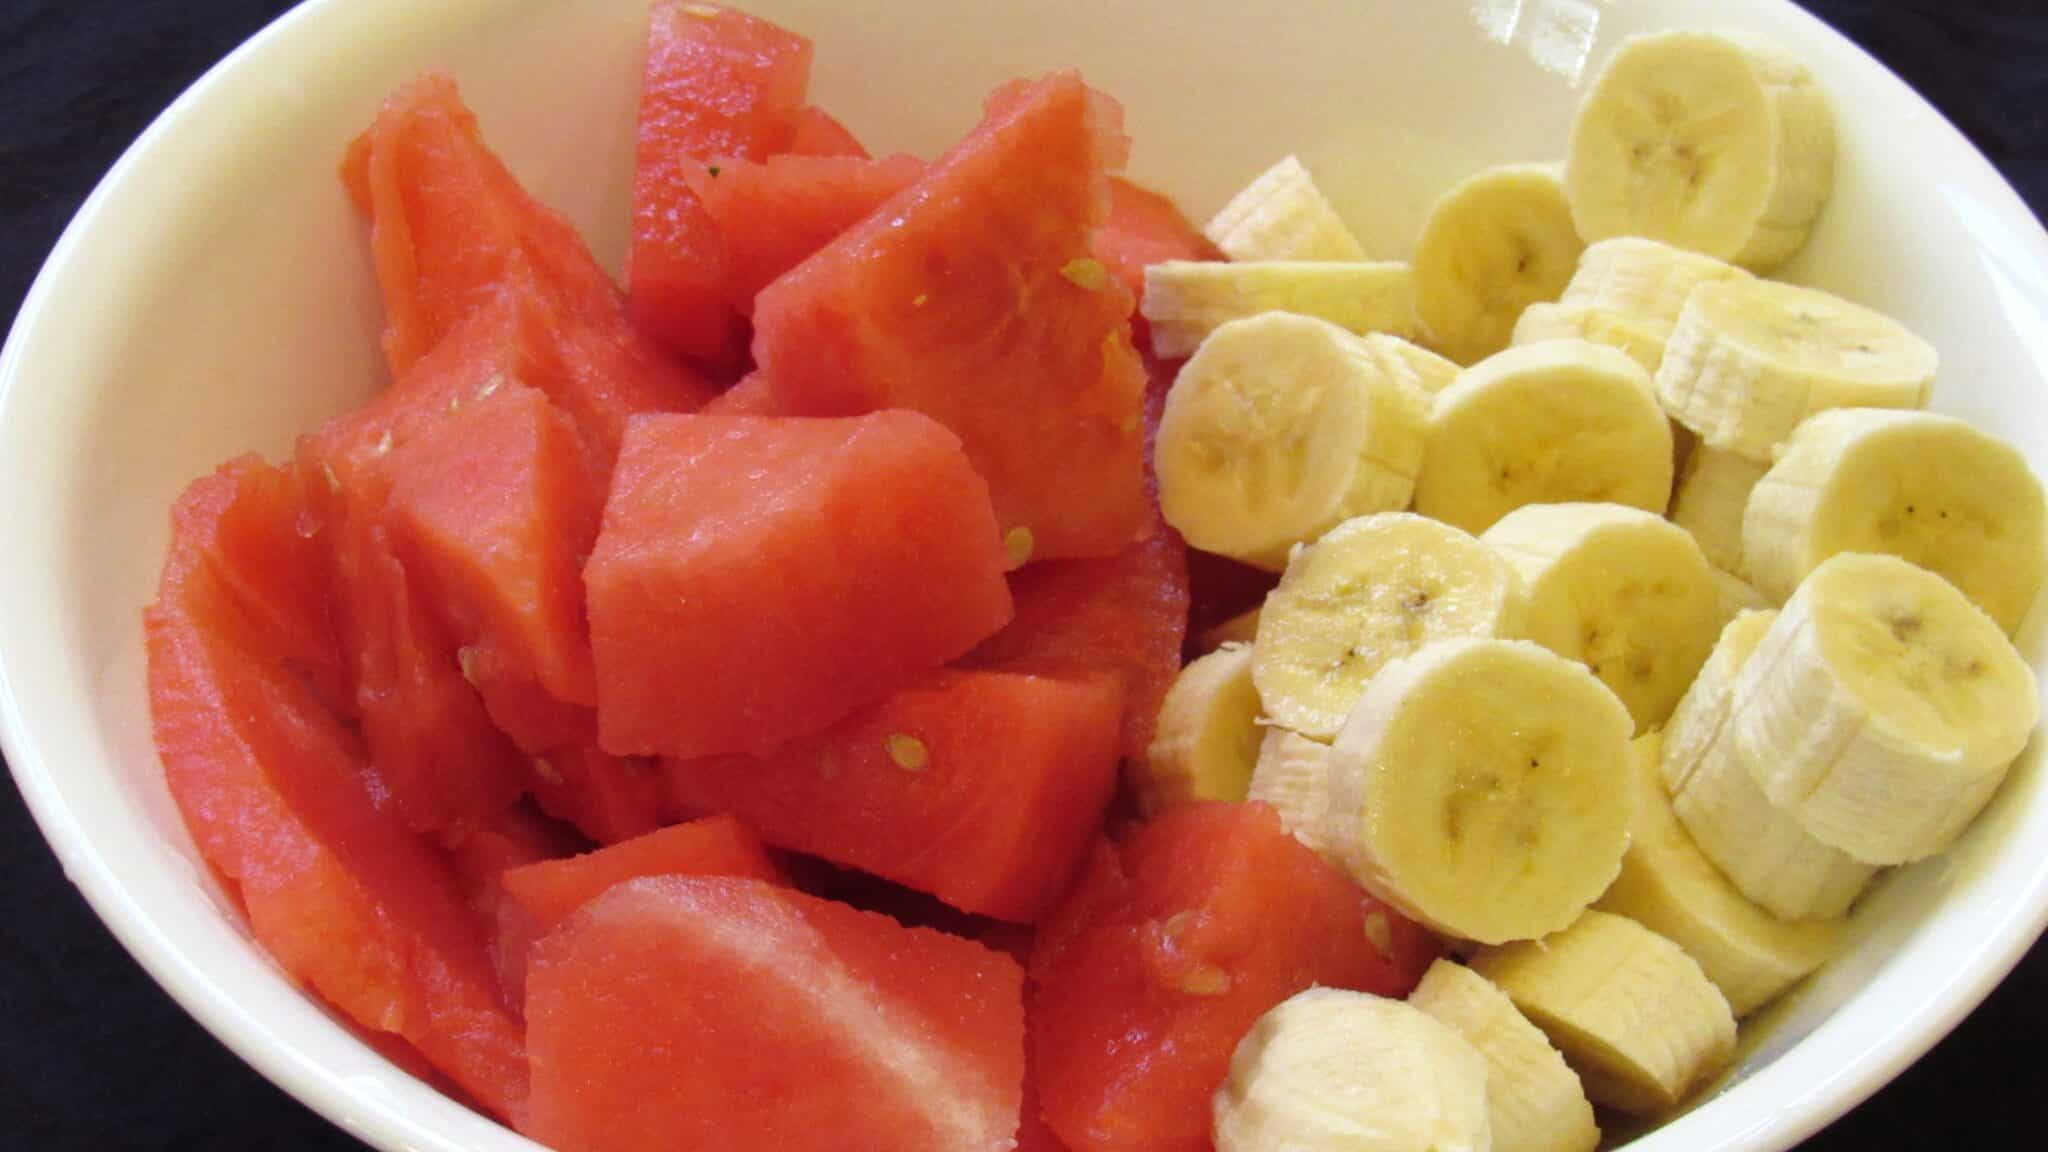 Diced watermelon and popsicles in a white bowl.